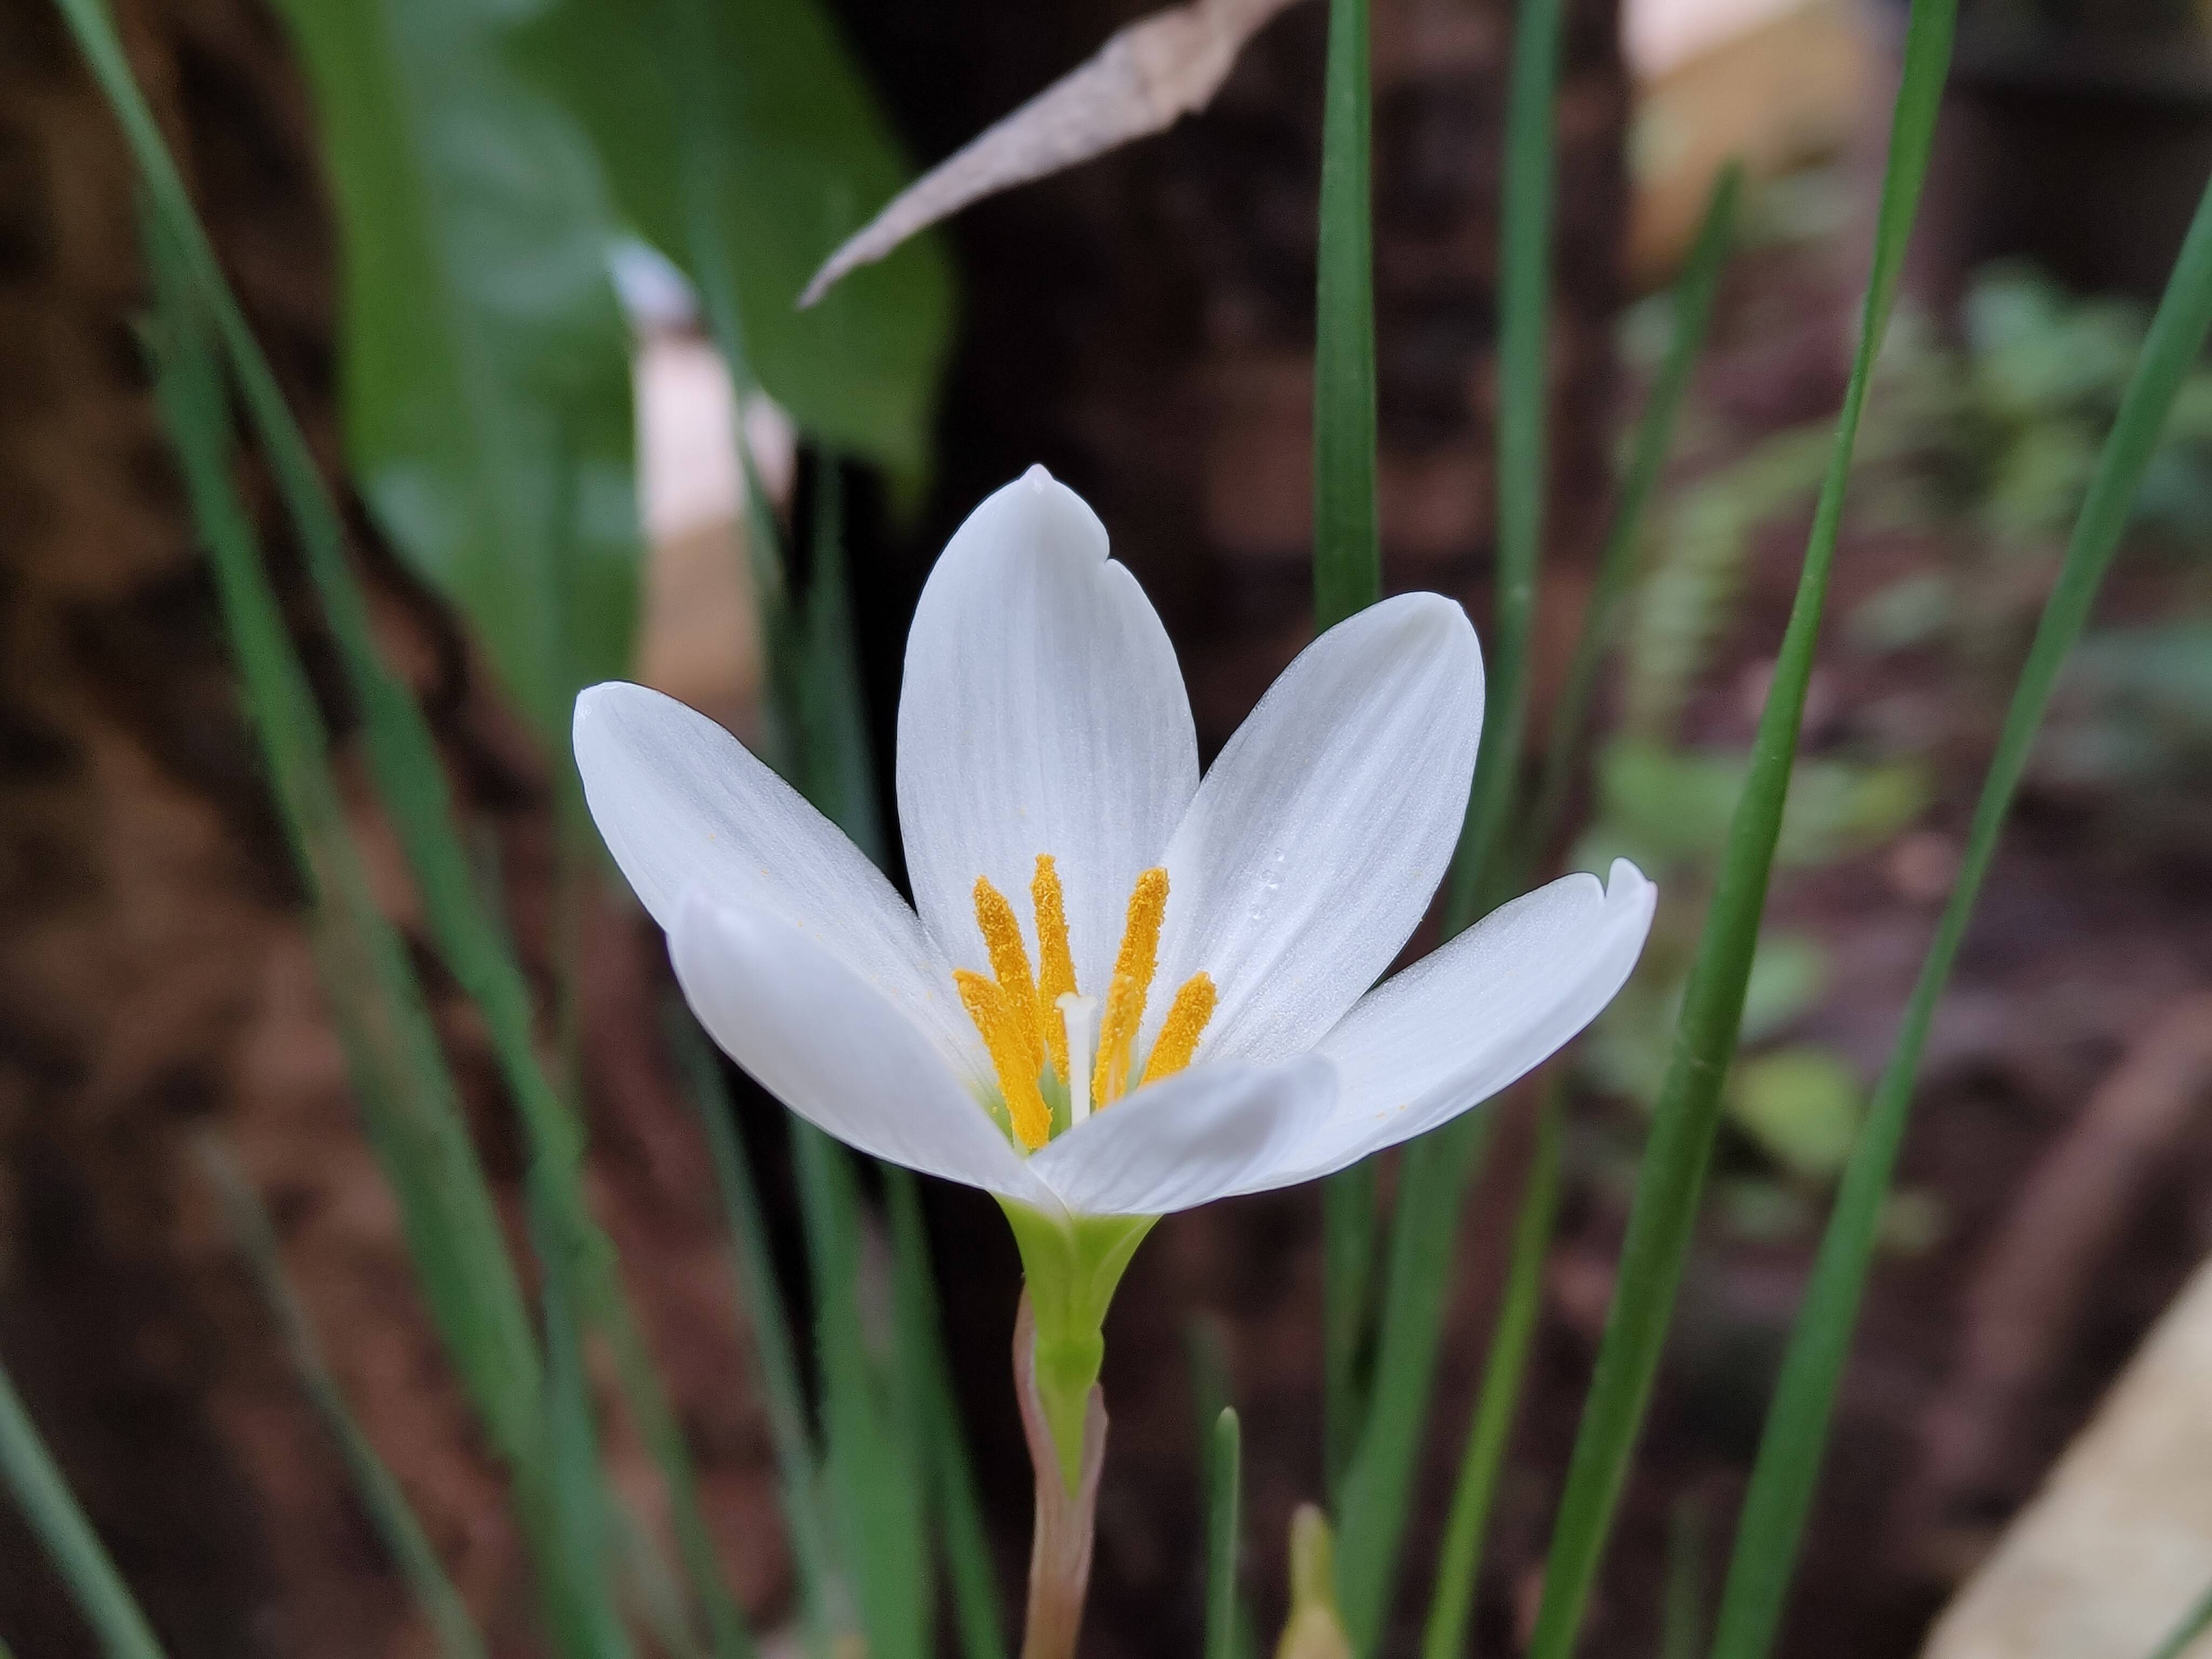 a zoomed-in image of a white lily